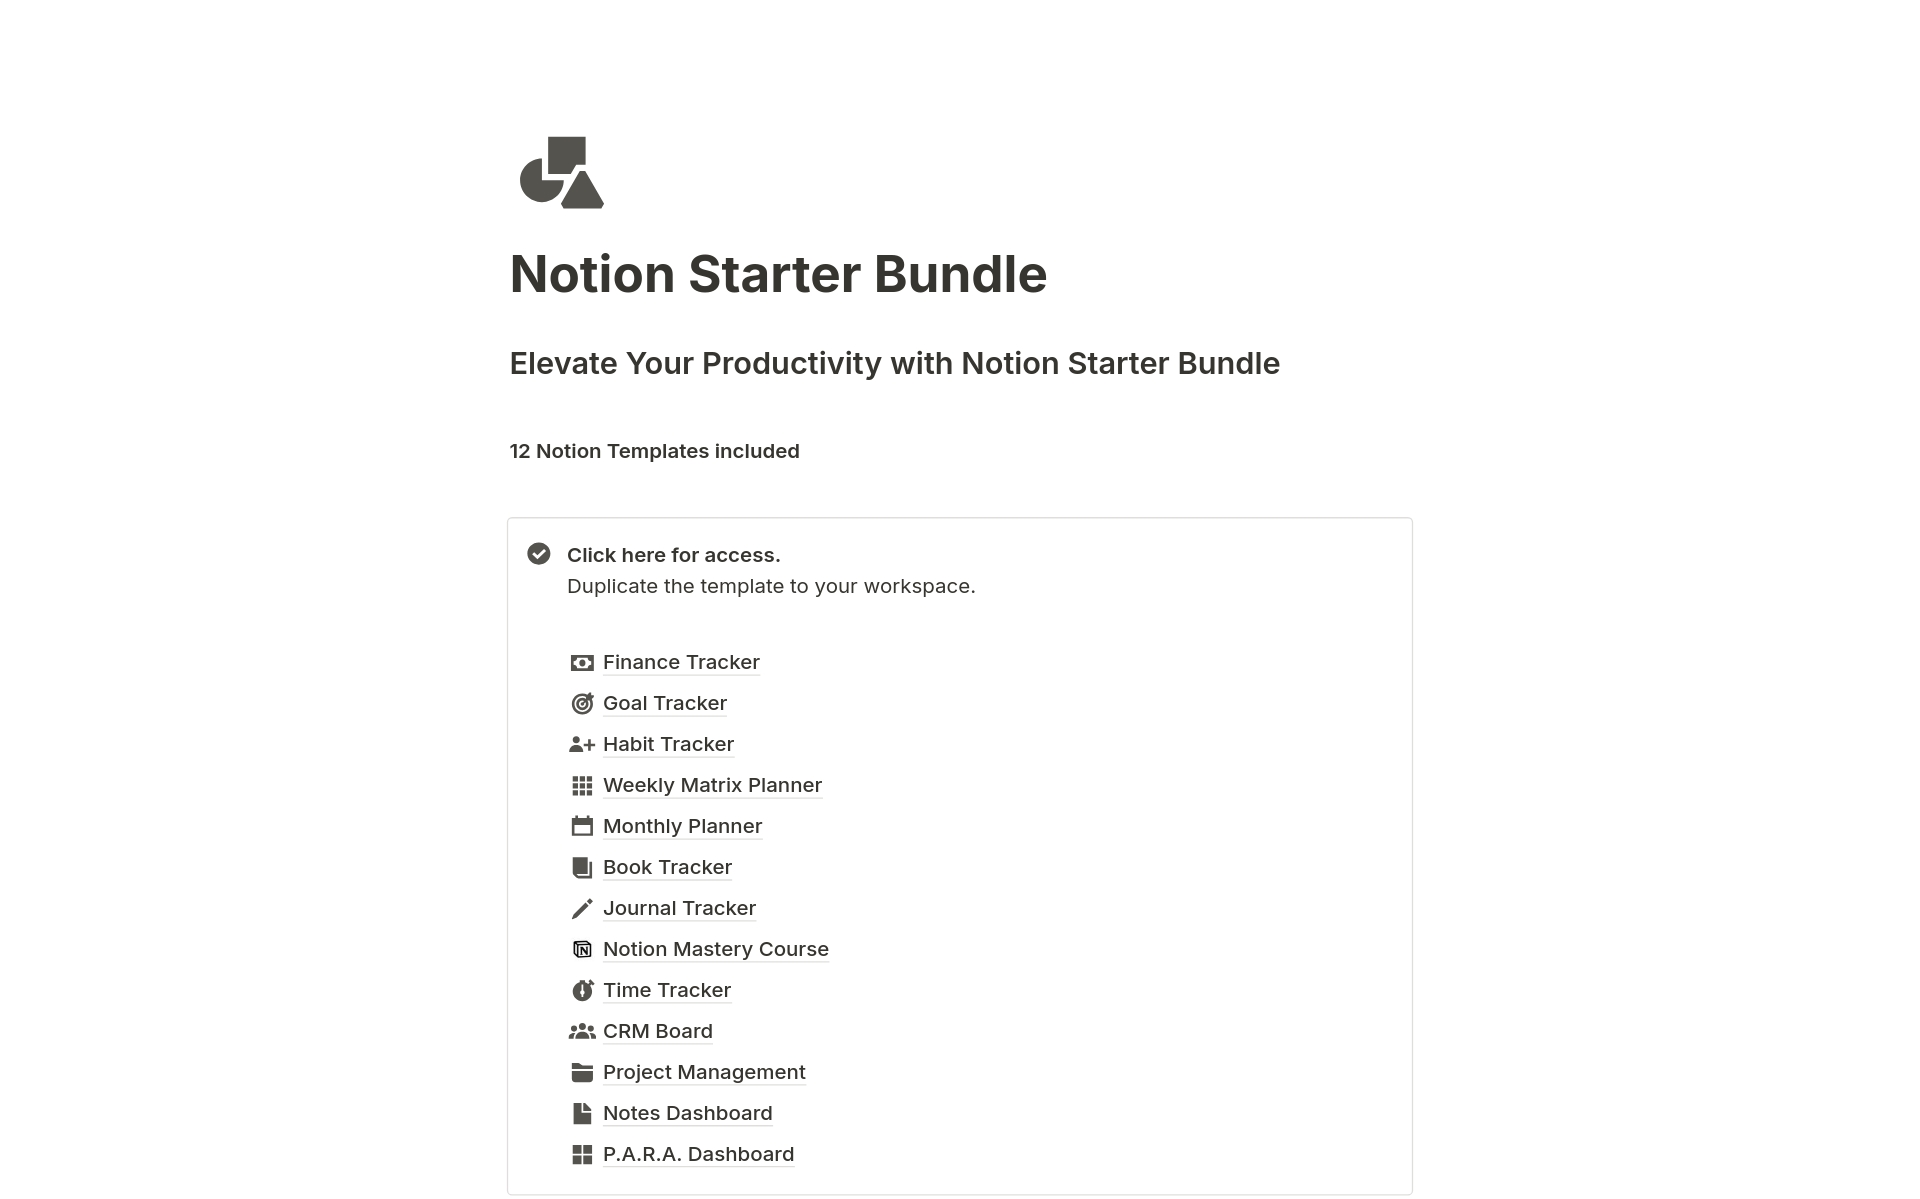 Get Started on Organizing Your Life in Notion.

This bundle includes 12 ready-to-use templates to eliminate the need to set up your Notion from scratch.